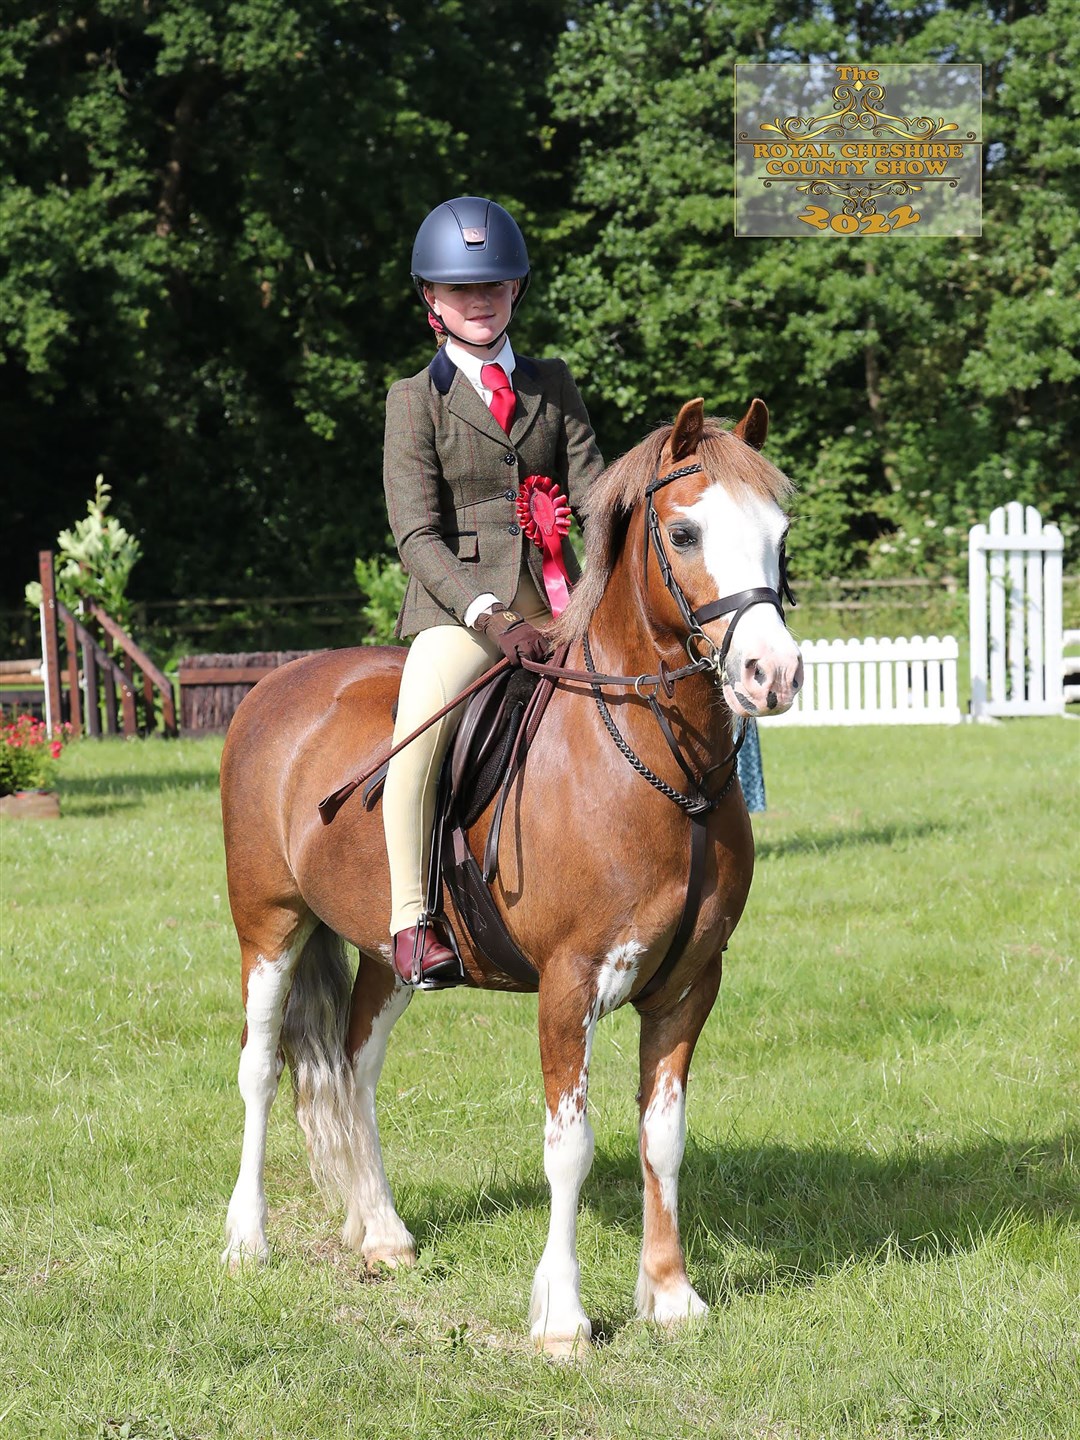 Annabel Thomson and Bertie have qualified for the Horse of the Year Show next week in Birmingham.